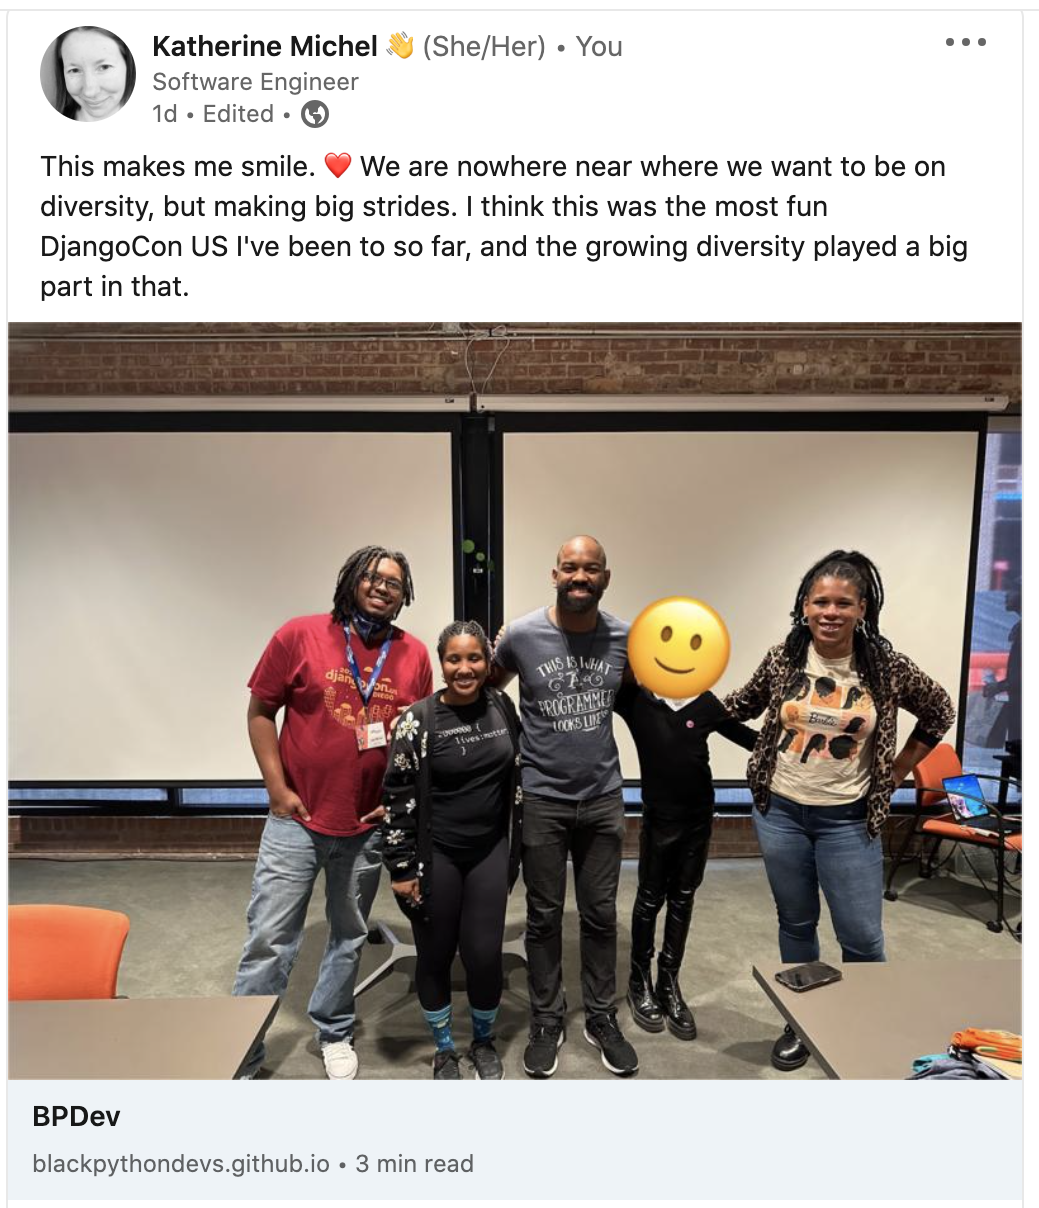 "This makes me smile. ❤️ We are nowhere near where we want to be on diversity, but making big strides. I think this was the most fun DjangoCon US I've been to so far, and the growing diversity played a big part in that."